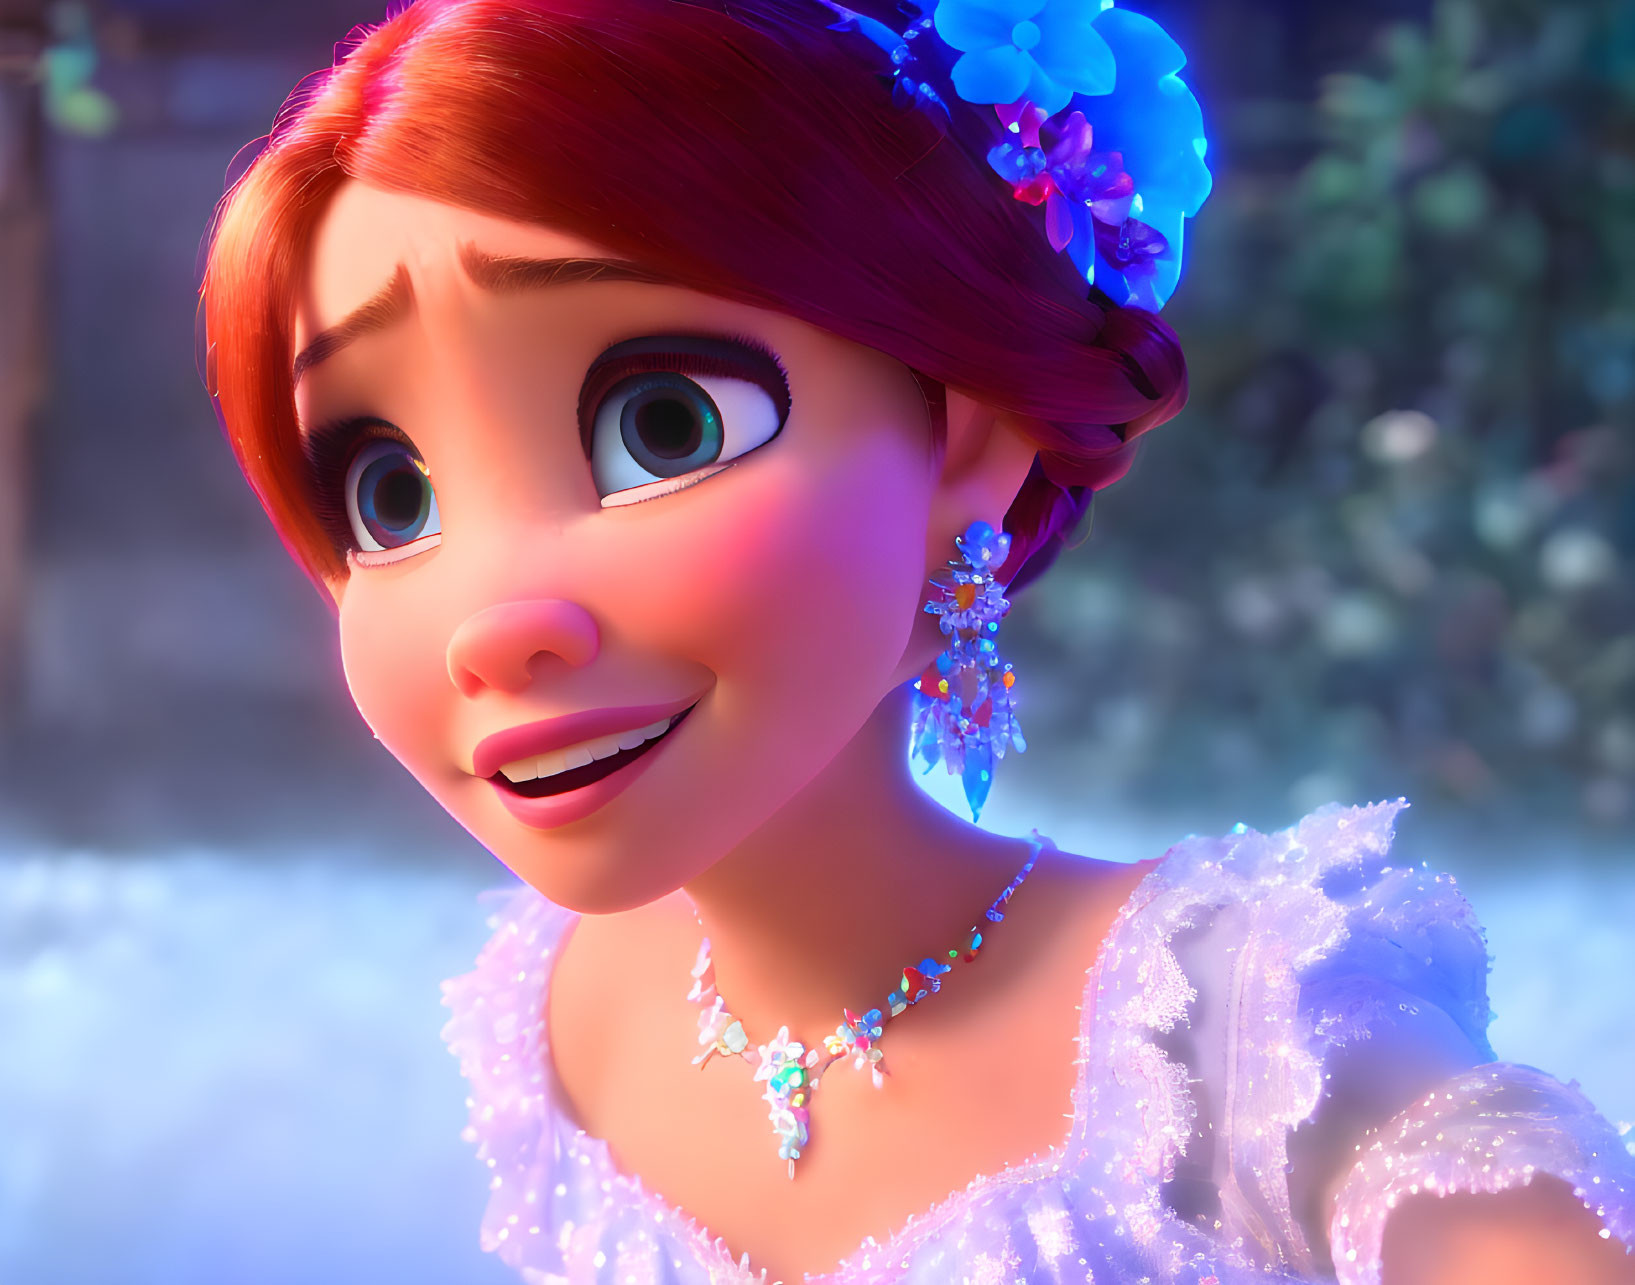 Smiling animated female character with red hair and blue flowers in white dress